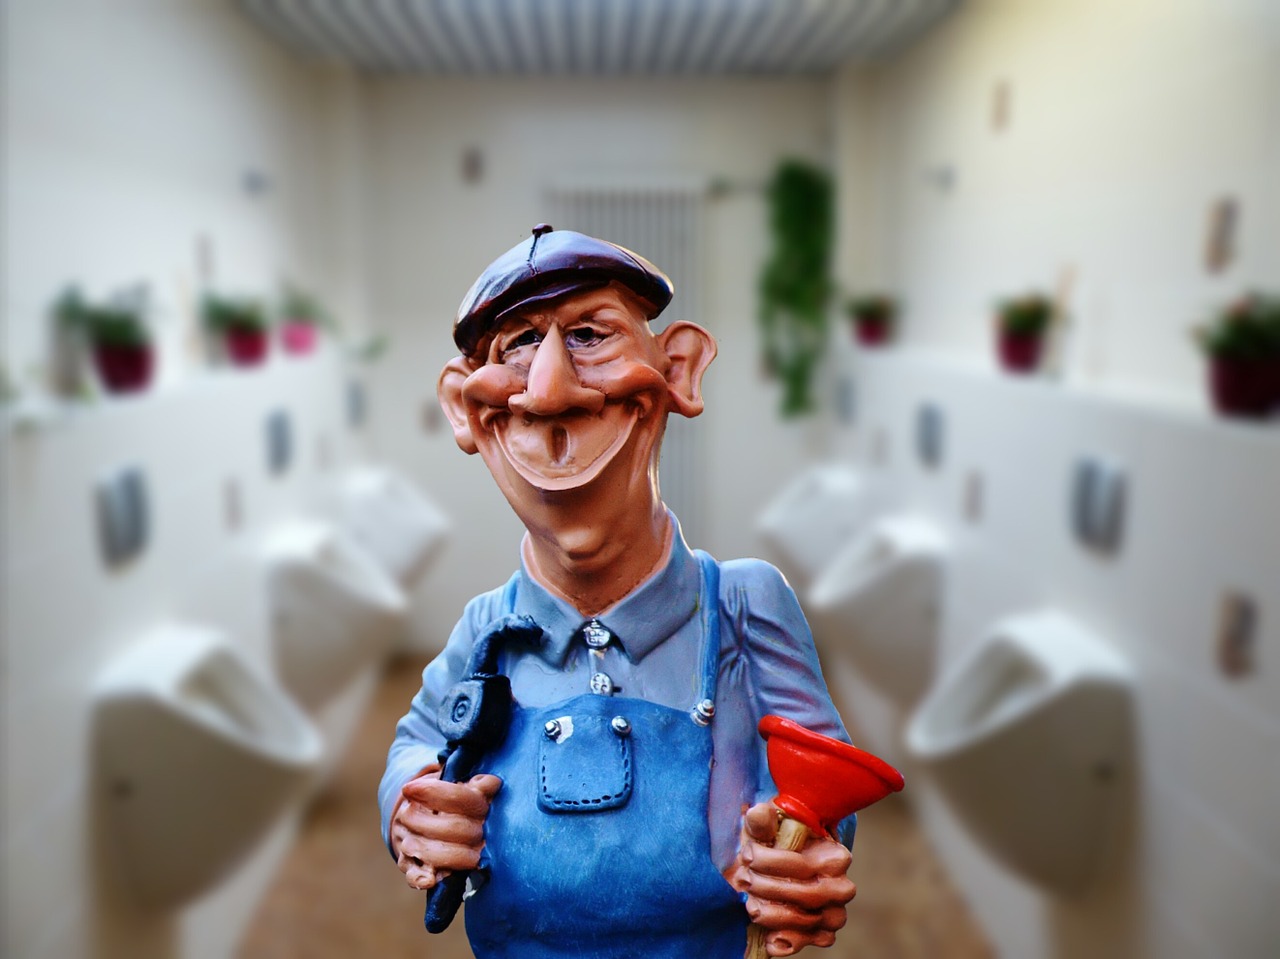 plumber janitor pömpel free photo